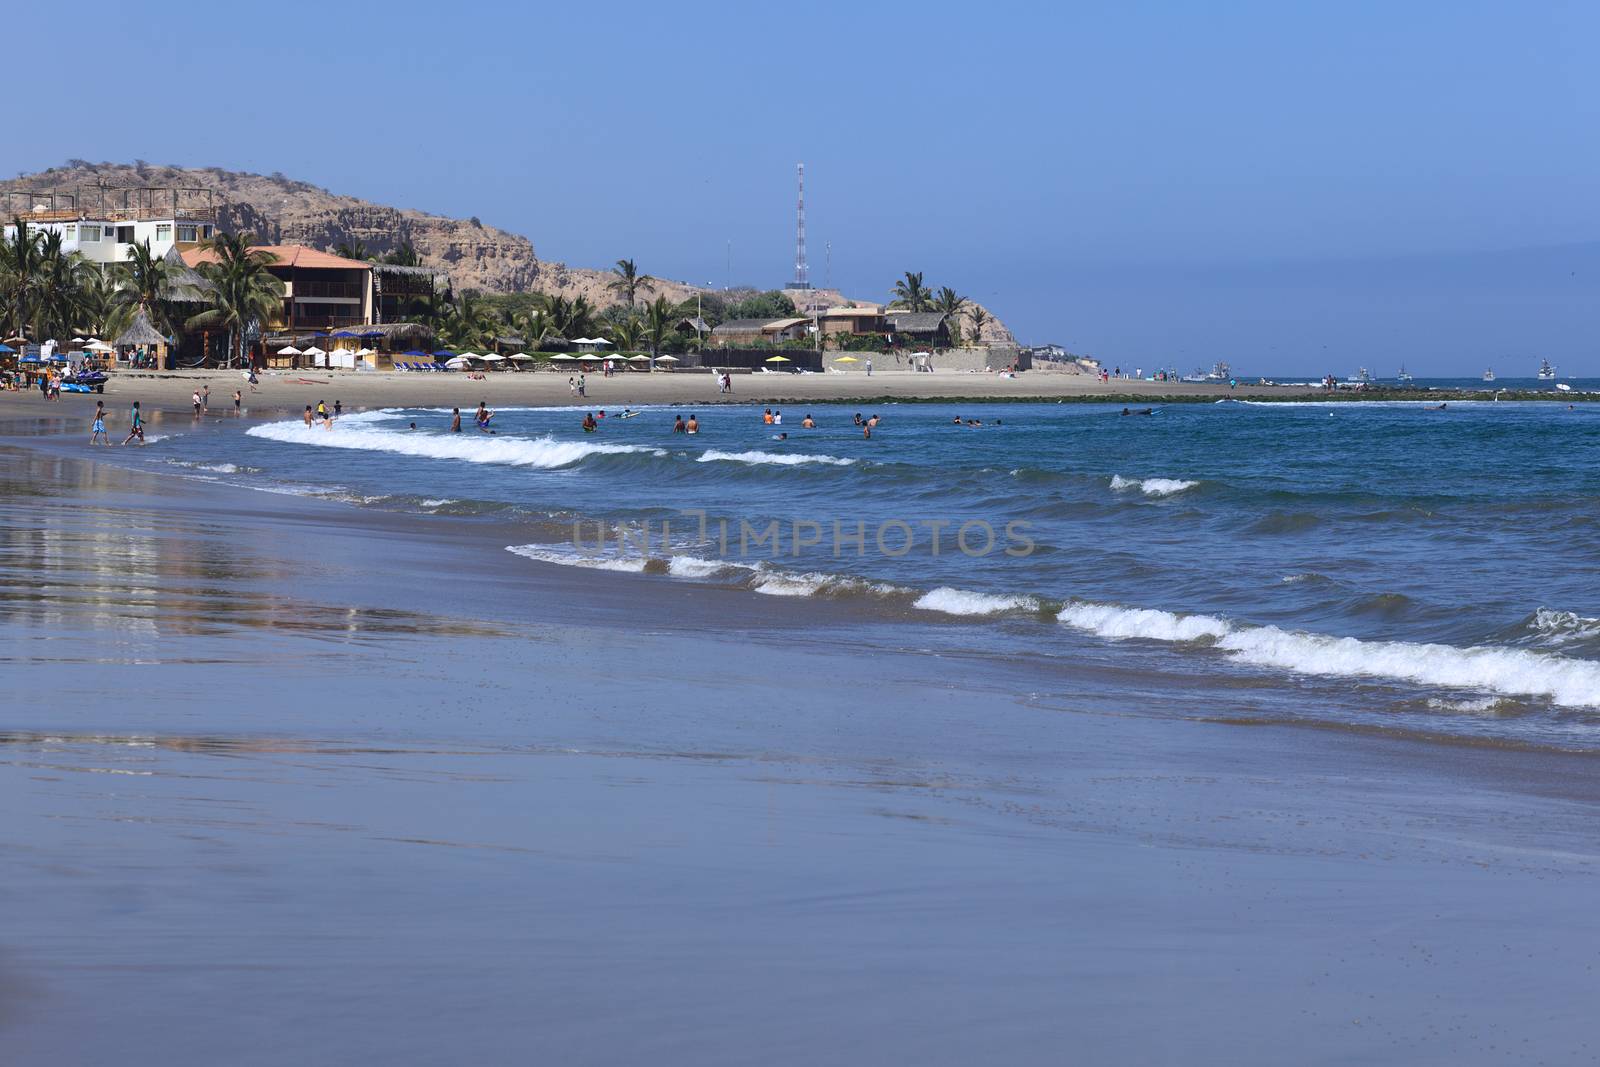 MANCORA, PERU - OCTOBER 4, 2013: Unidentified people on the beach and in the water on a sunny day on October 4, 2013 in Mancora, Peru. Mancora is a popular beach town in Northern Peru.  